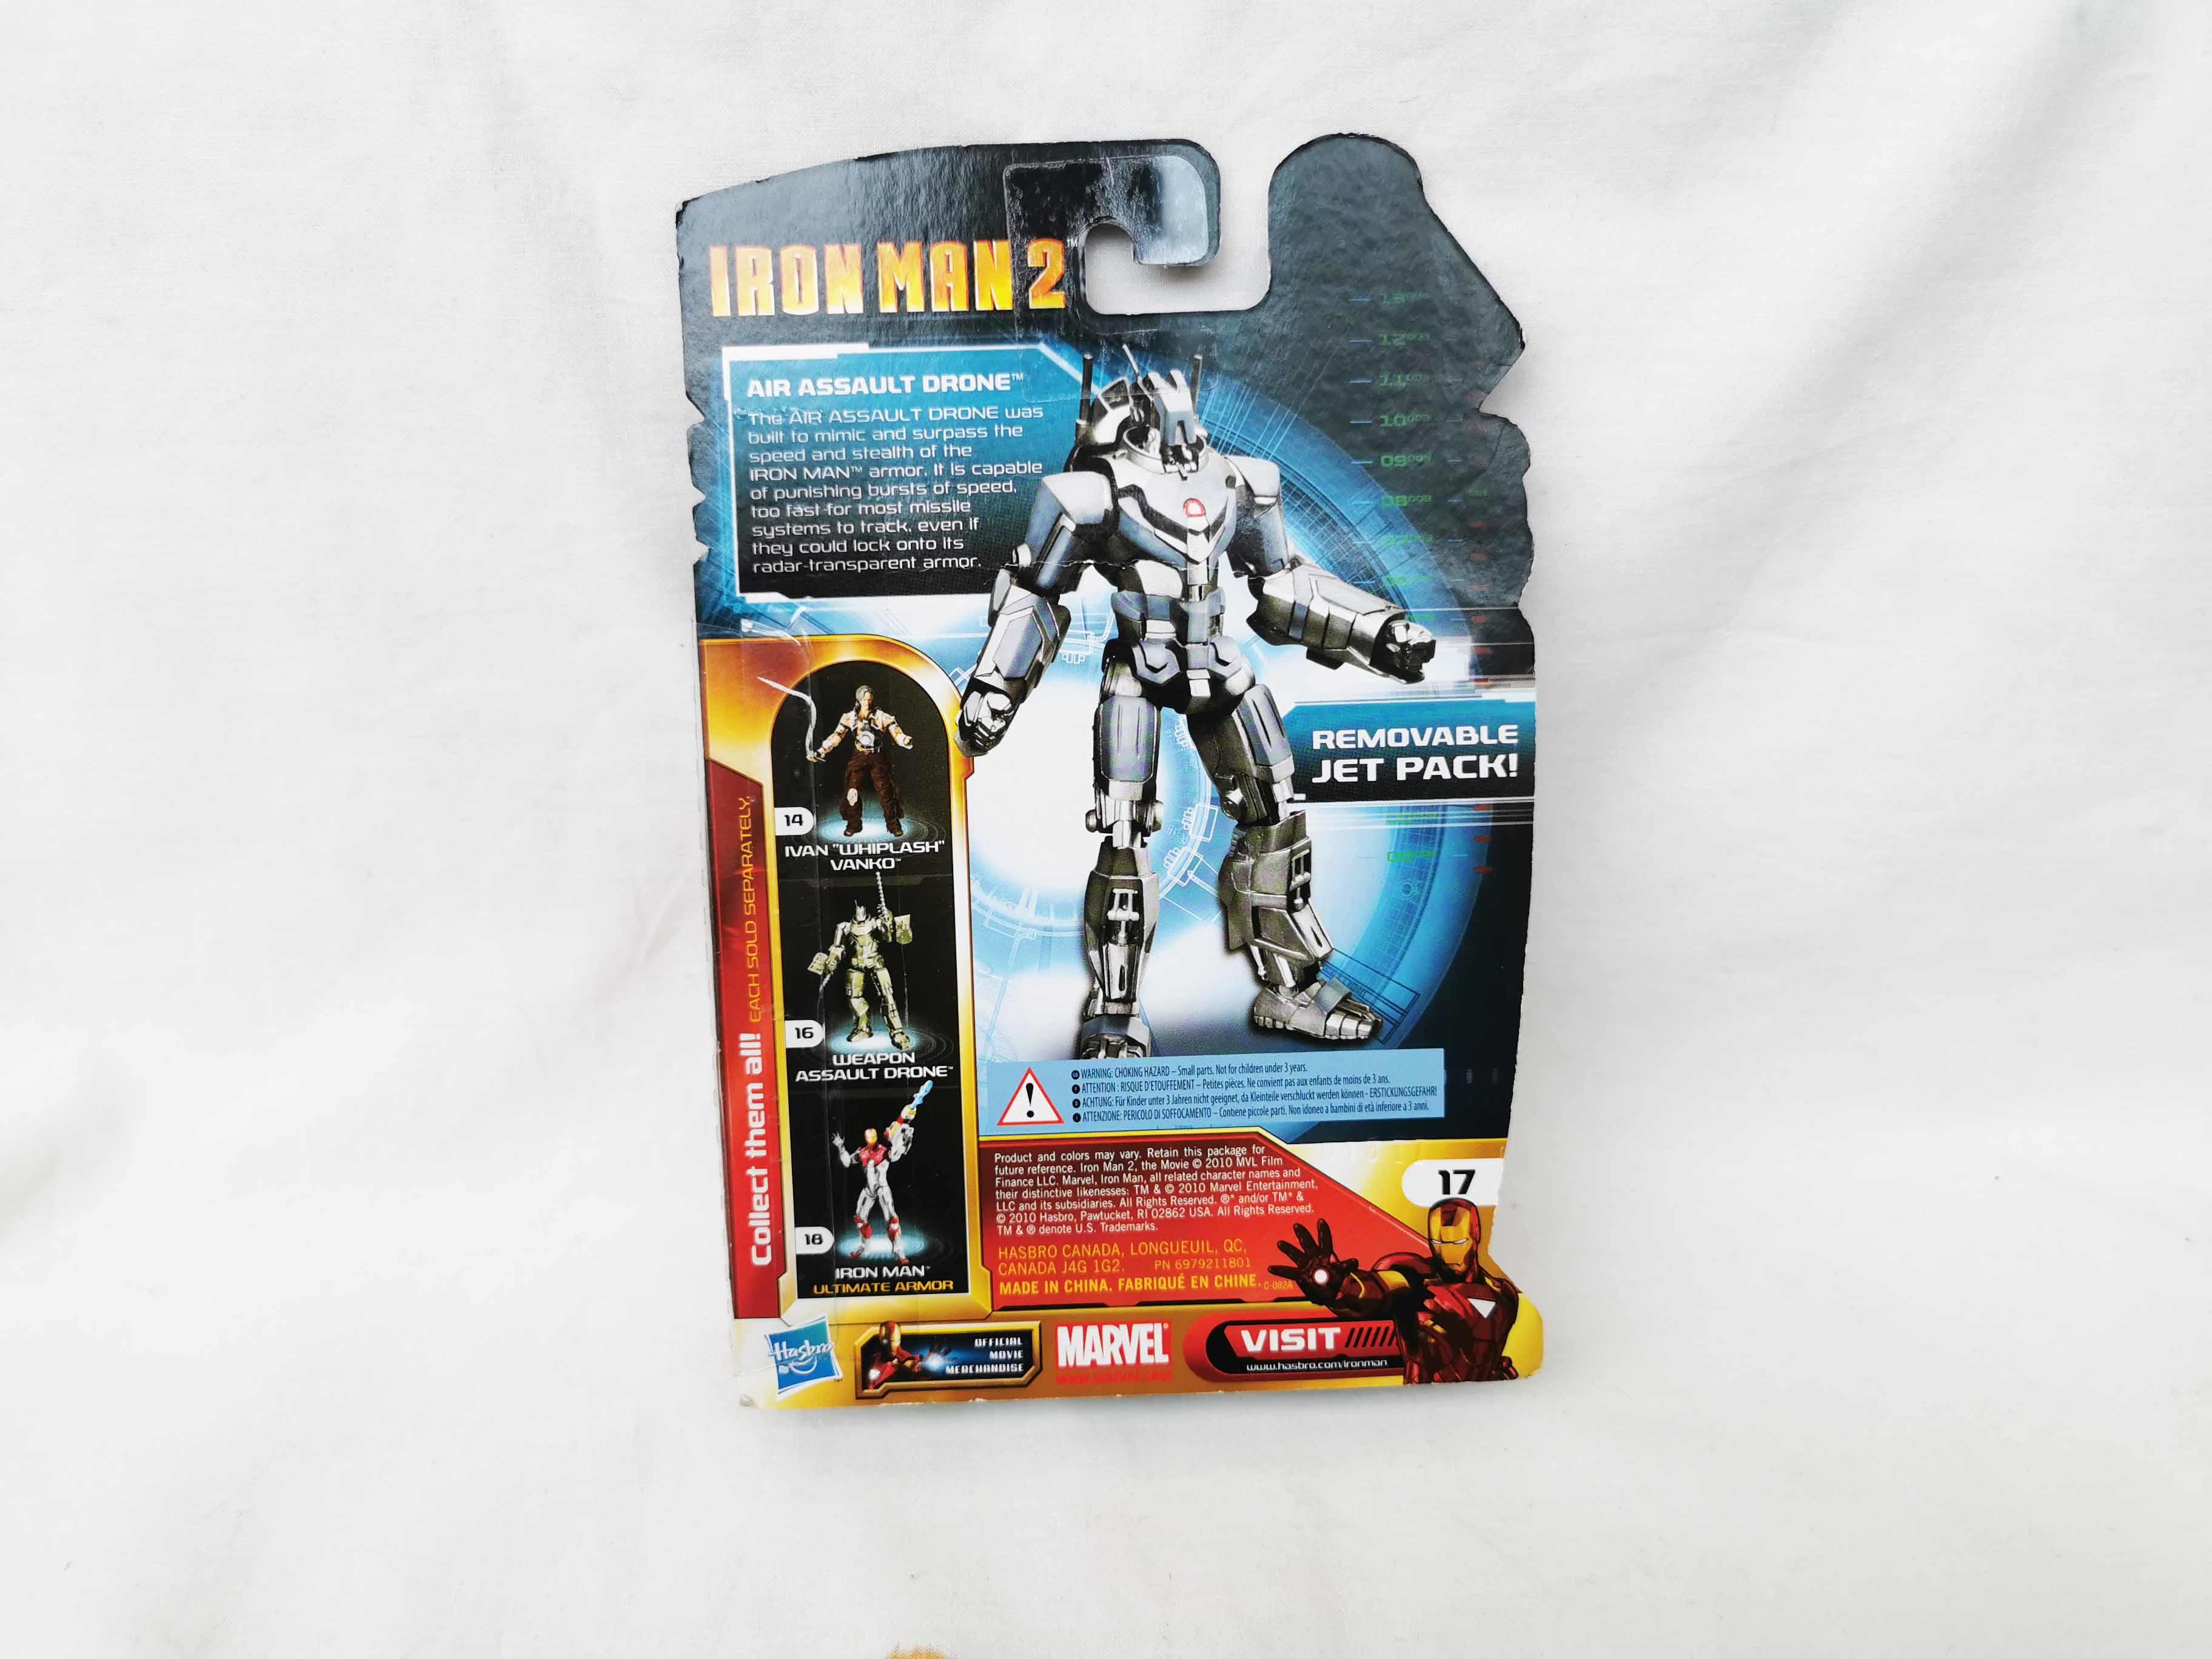 Air Assault Drone Marvel Universe Carded Action Figure 3.75 scale Hasbro